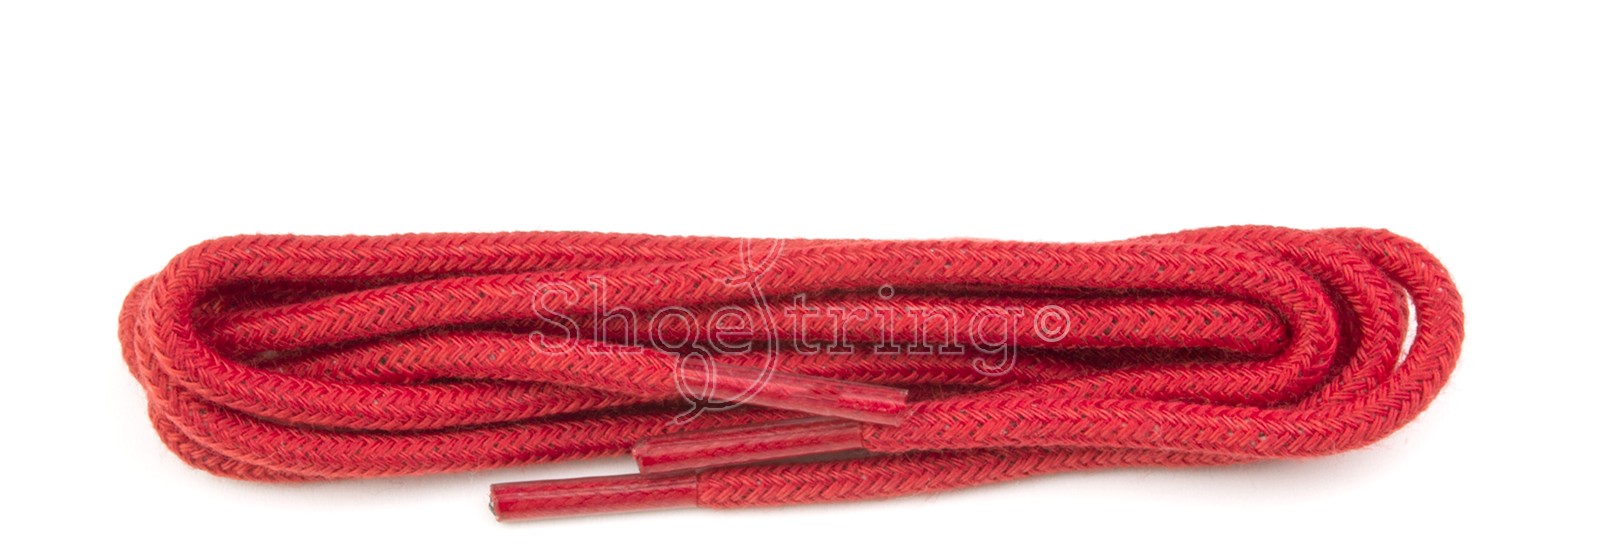 red boot laces uk